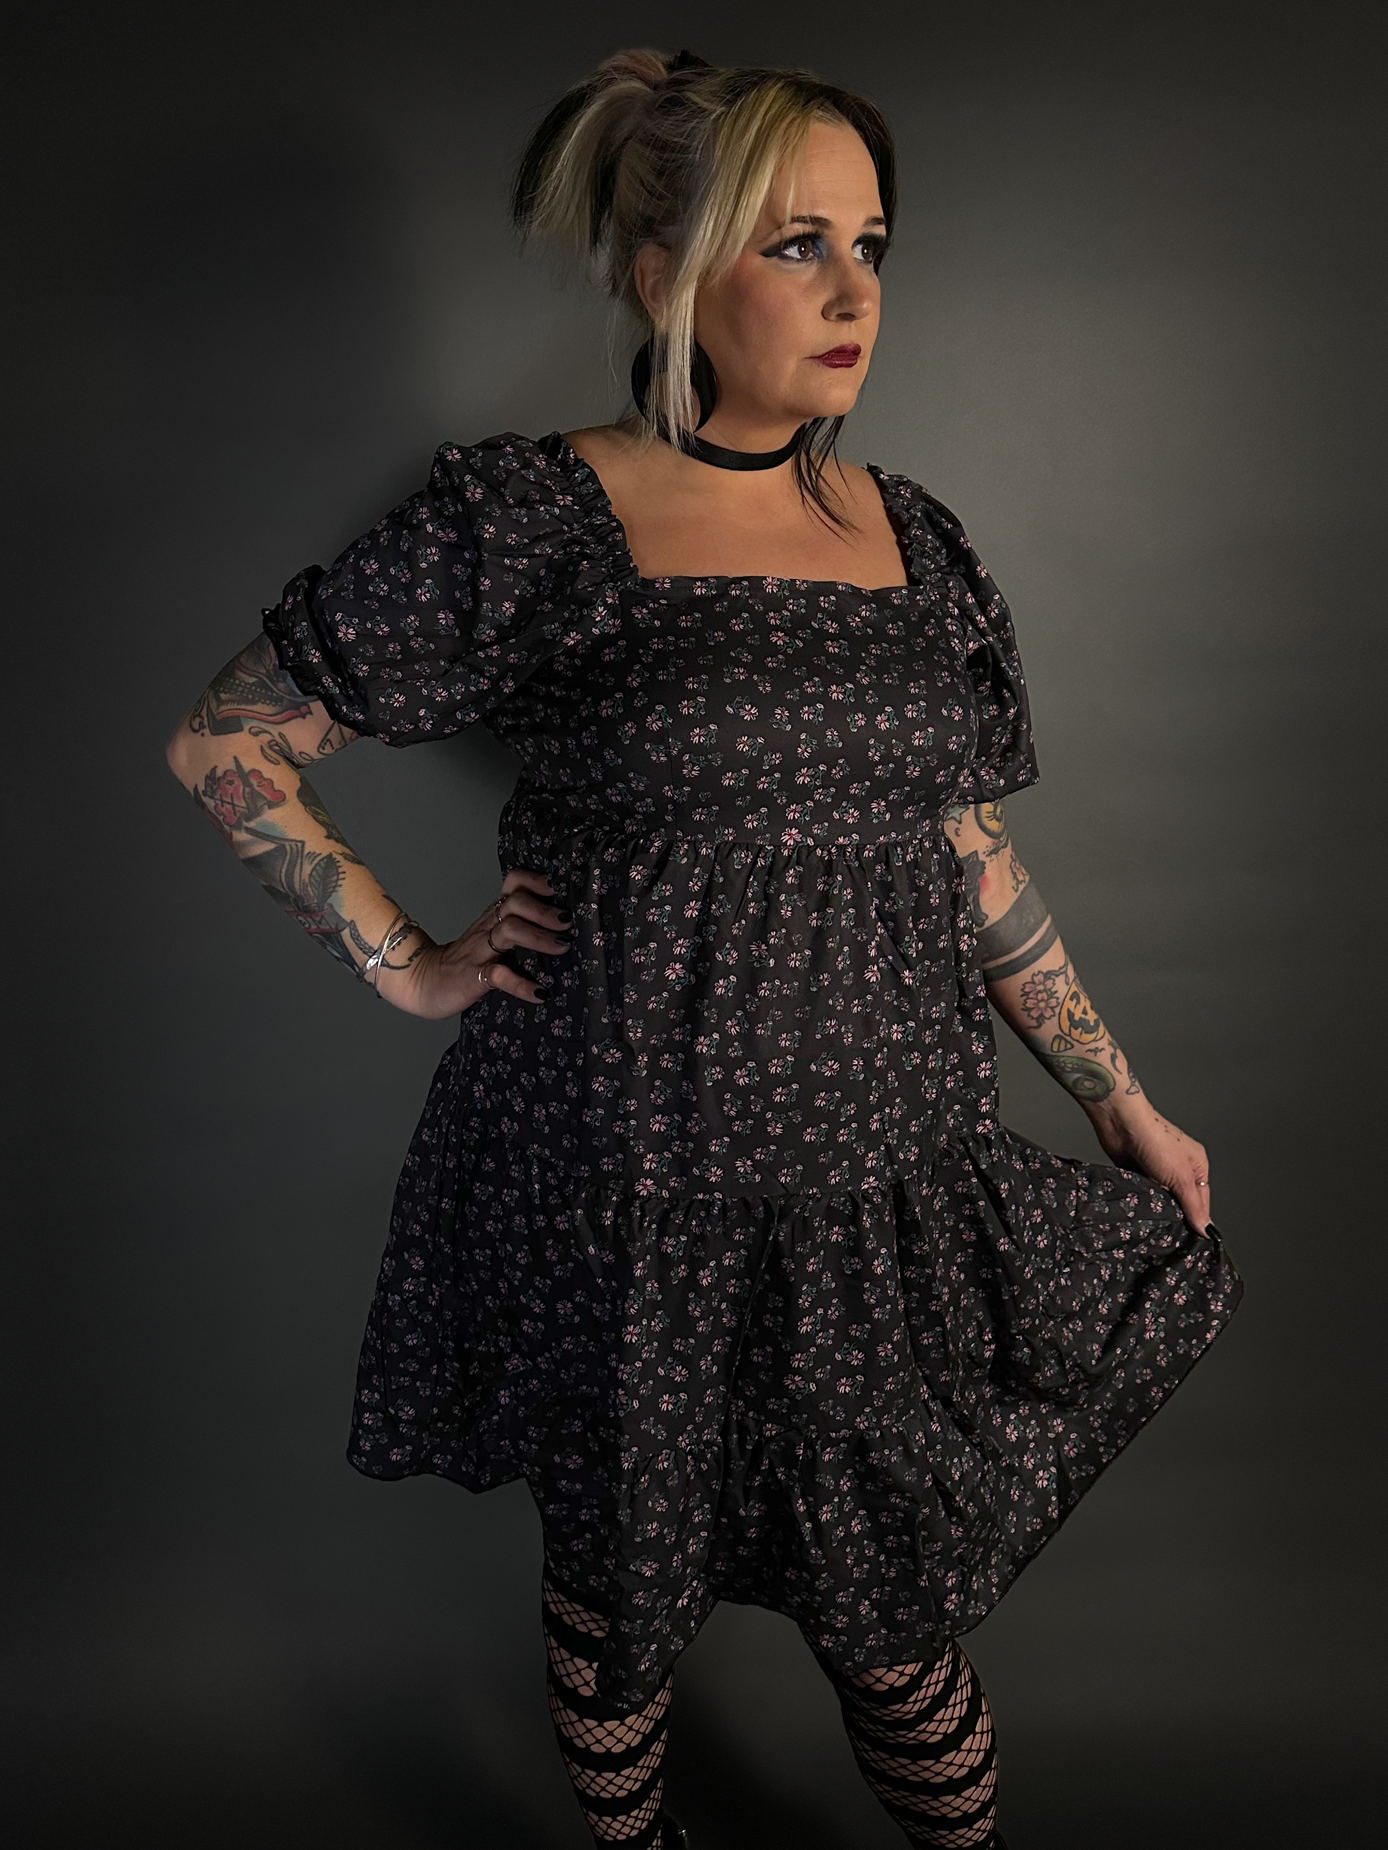 Floral Print French Style Layered Dress with Square Neck Goth / Indie Style